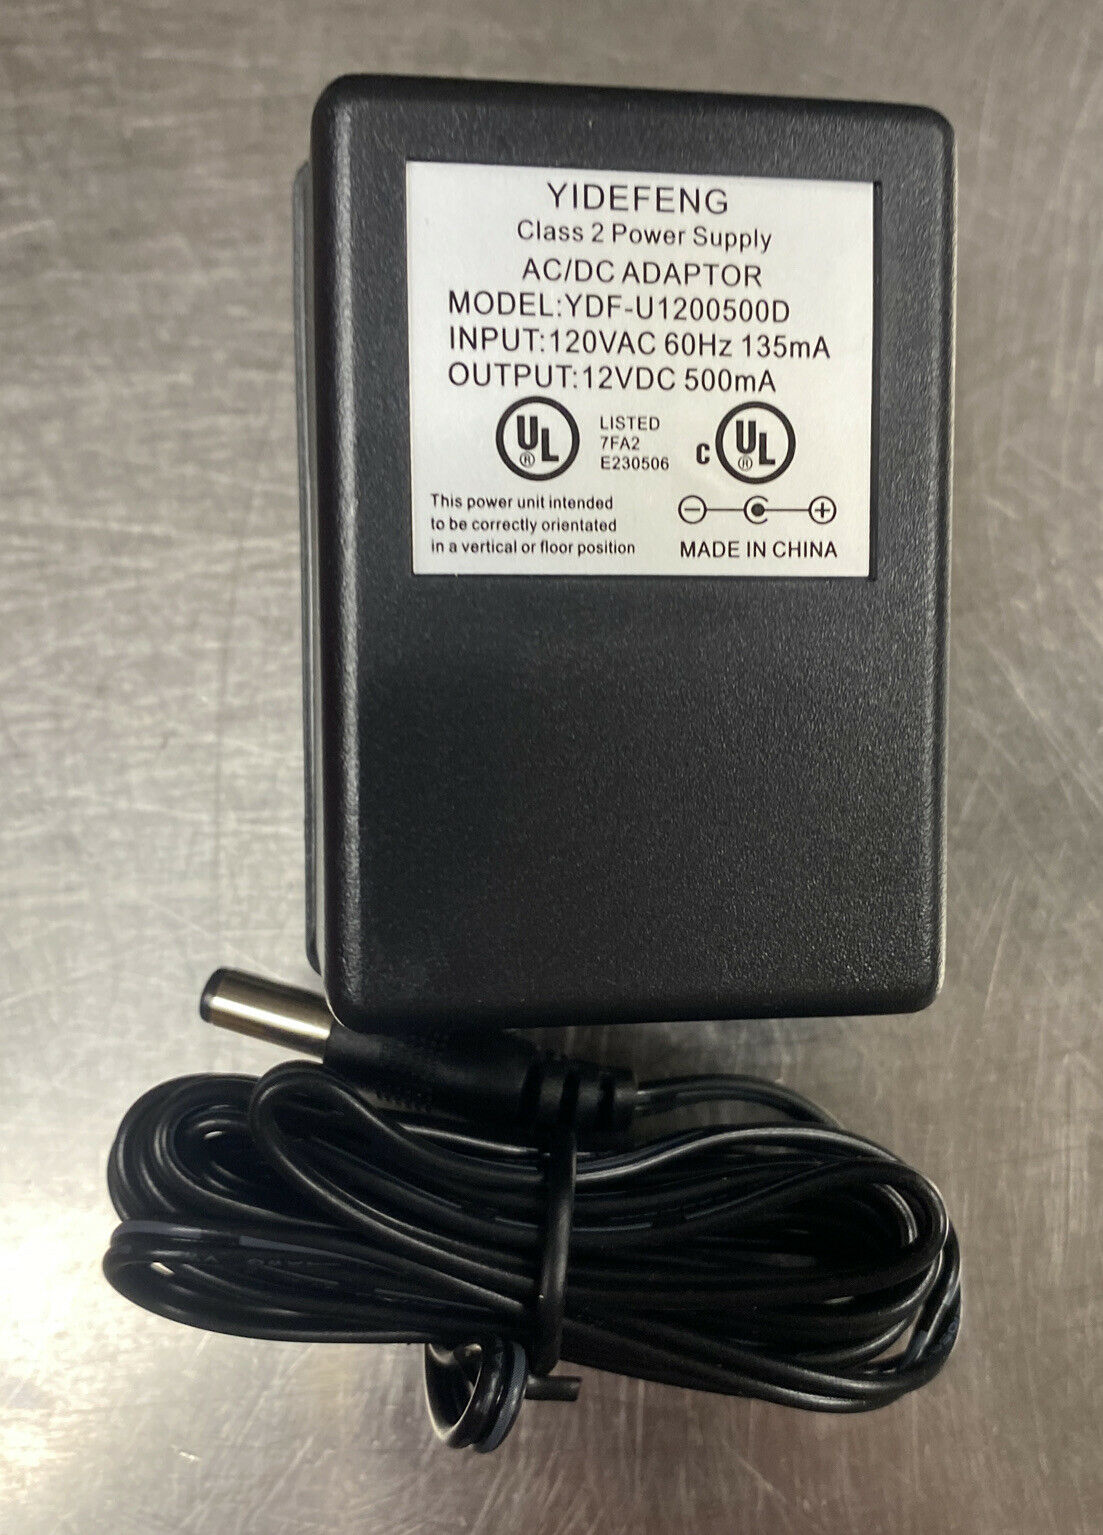 12V 500mA AC DC Adapter Wall Mount Linear Power Supplies Adapter - Yidefeng Brand: Yidefeng Type: AC/DC Adapter Con